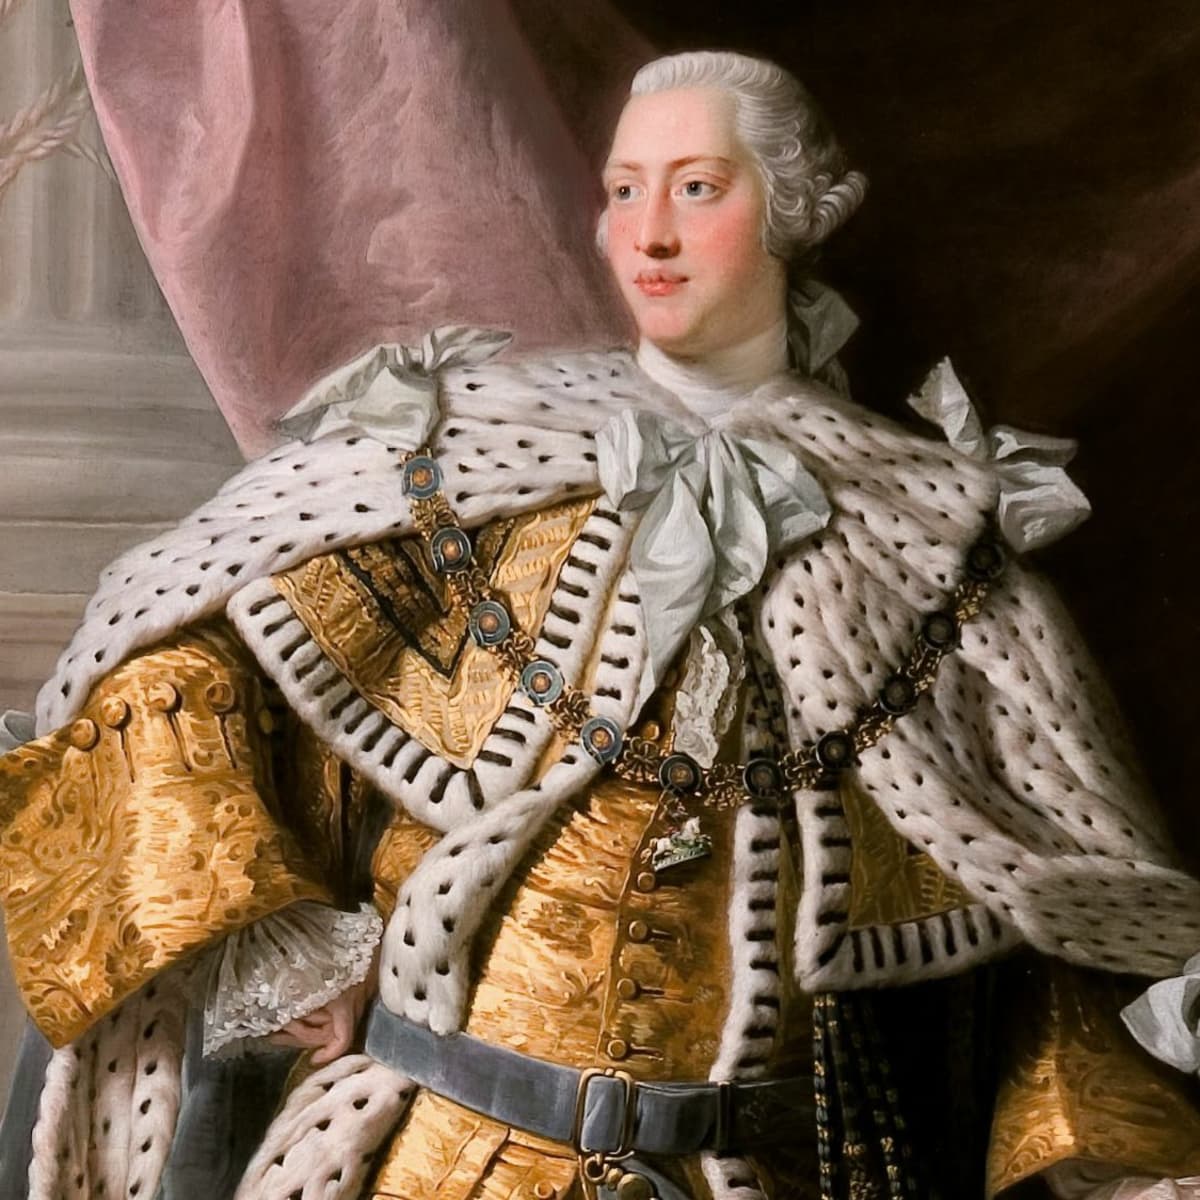 What is King George III's Illness in 'Queen Charlotte: A